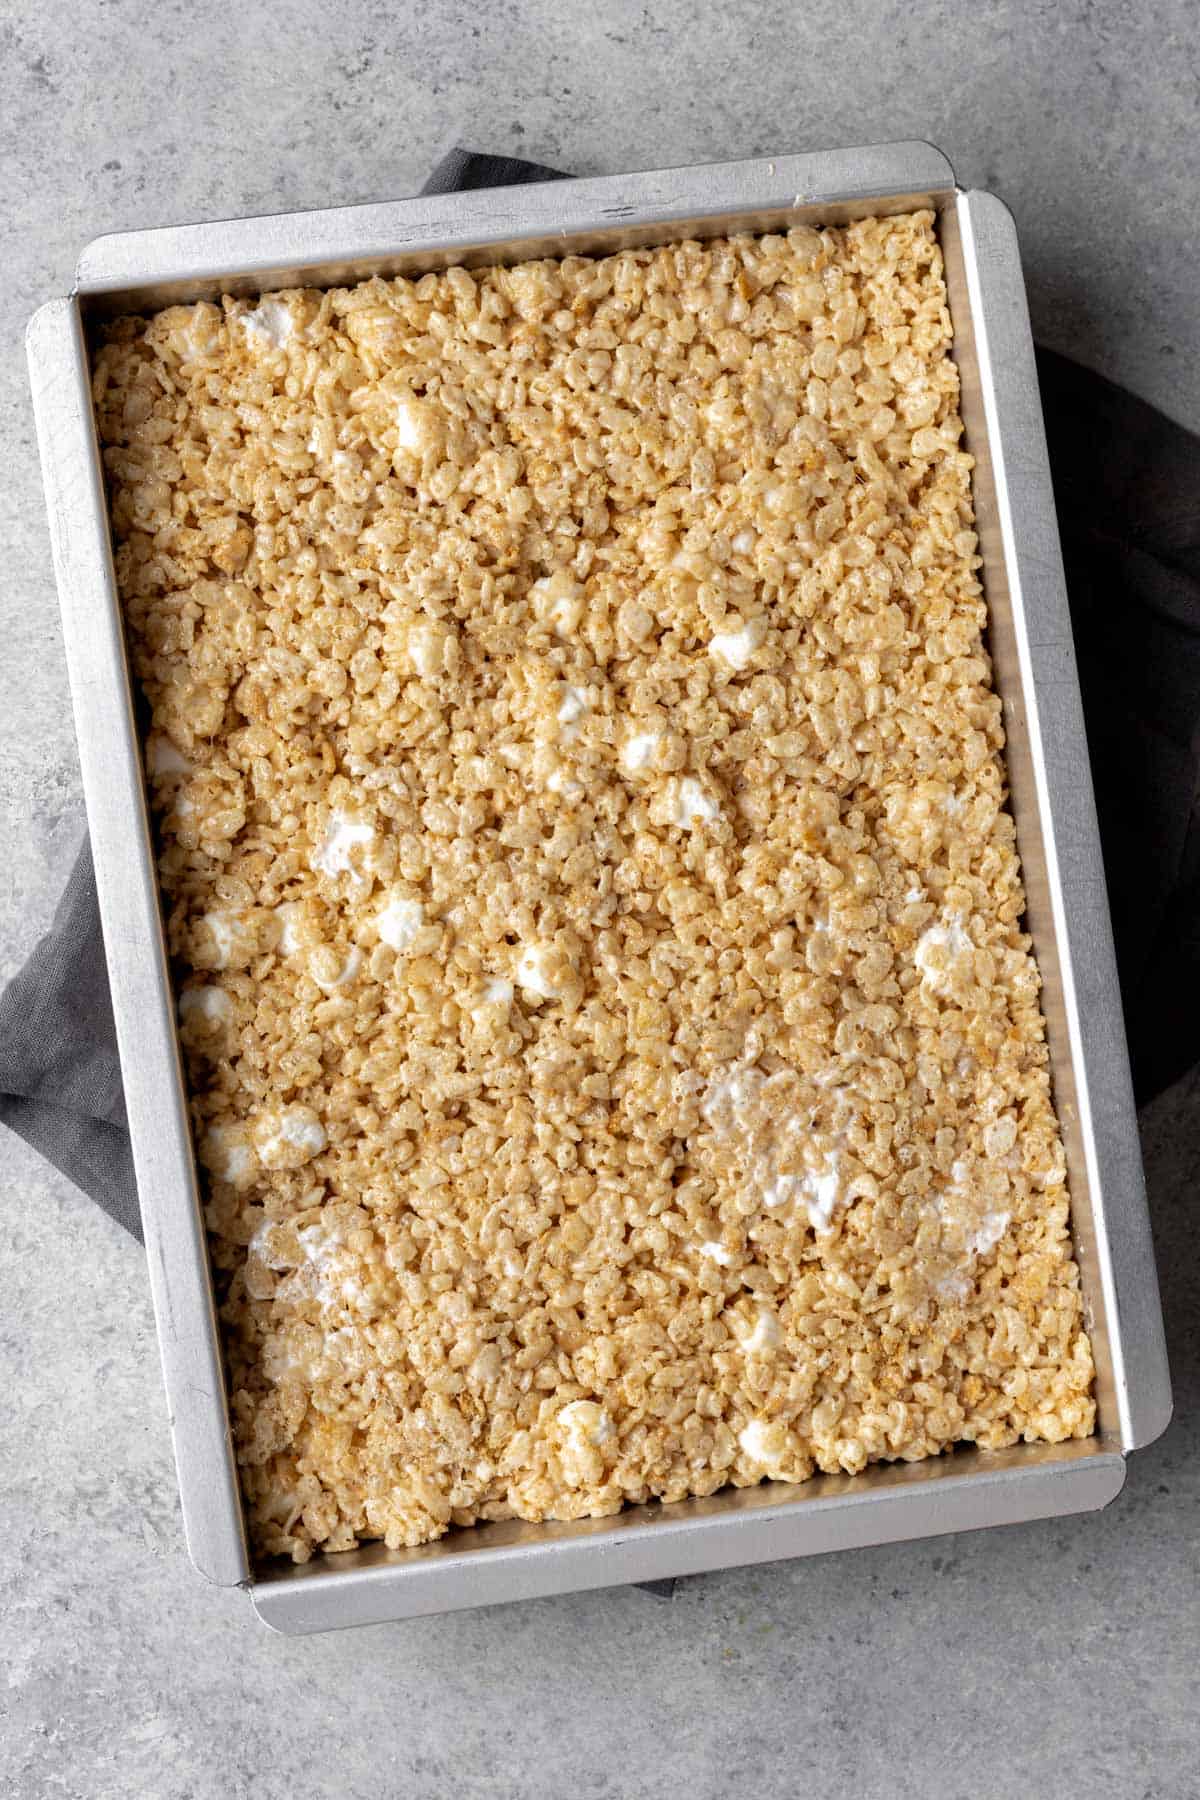 Smores rice krispie treats with marshmallows in a 9x13 baking pan.